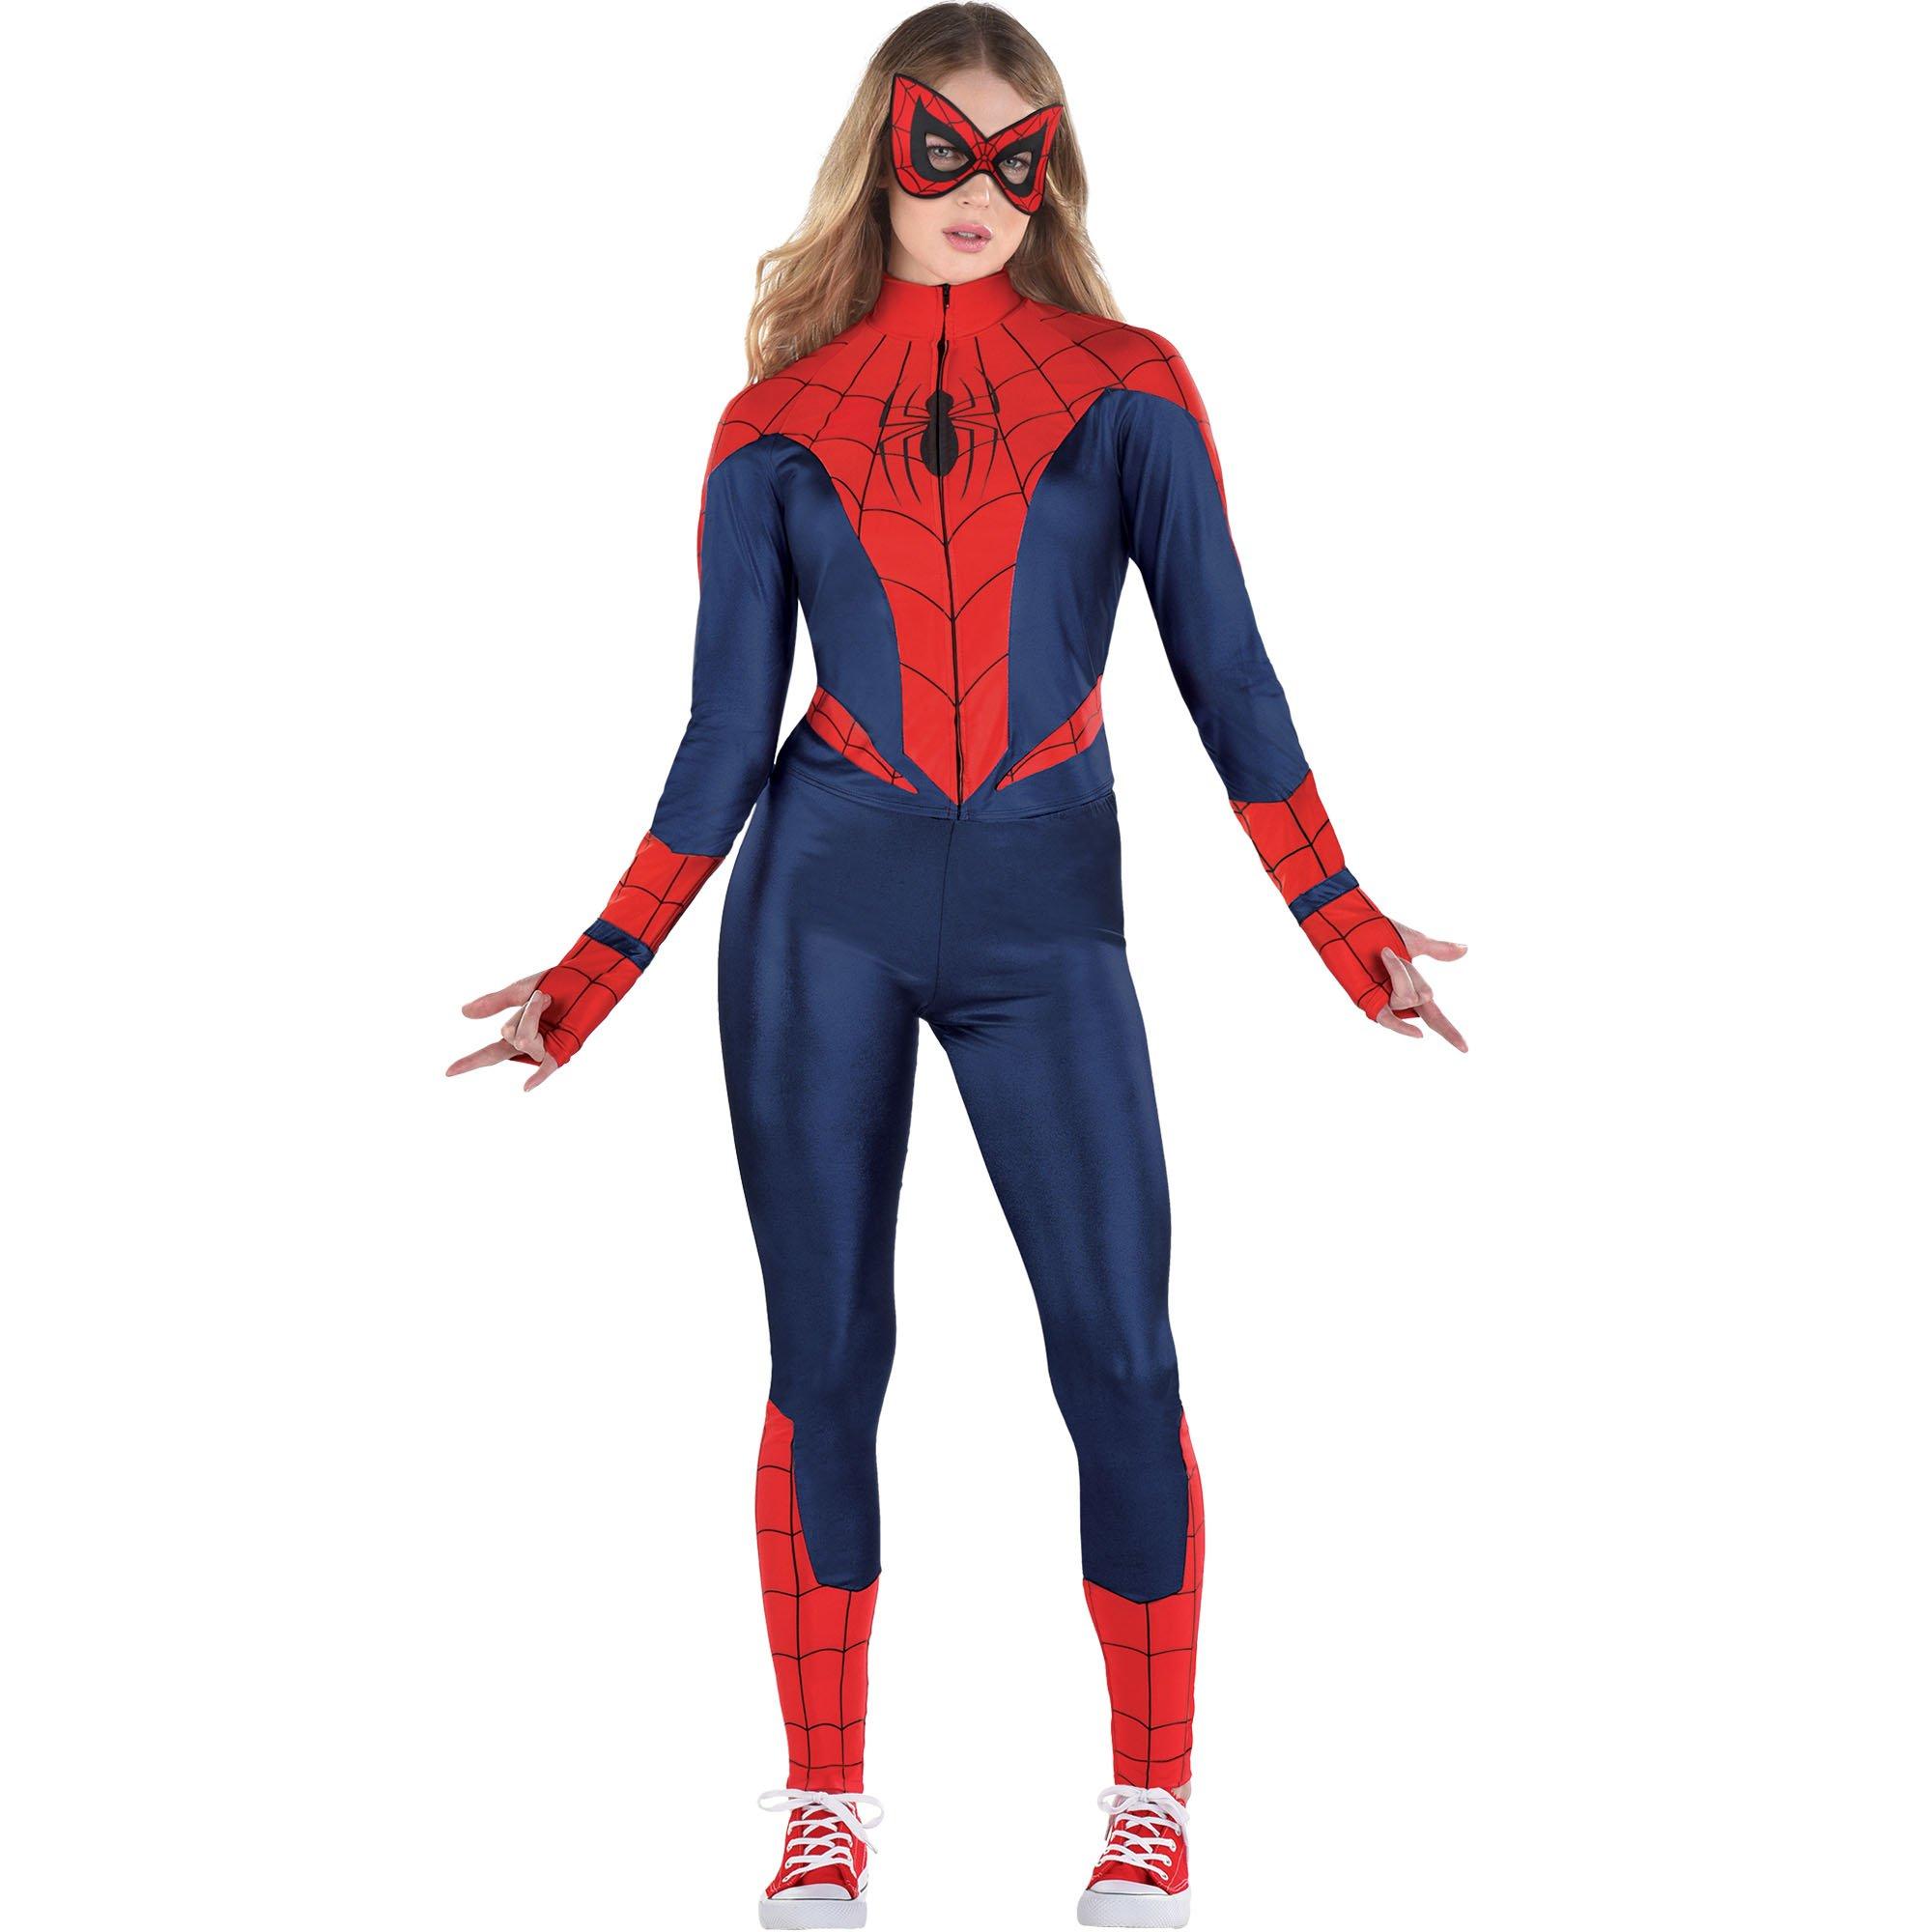 Adult Spider-Girl Costume - Marvel | Party City